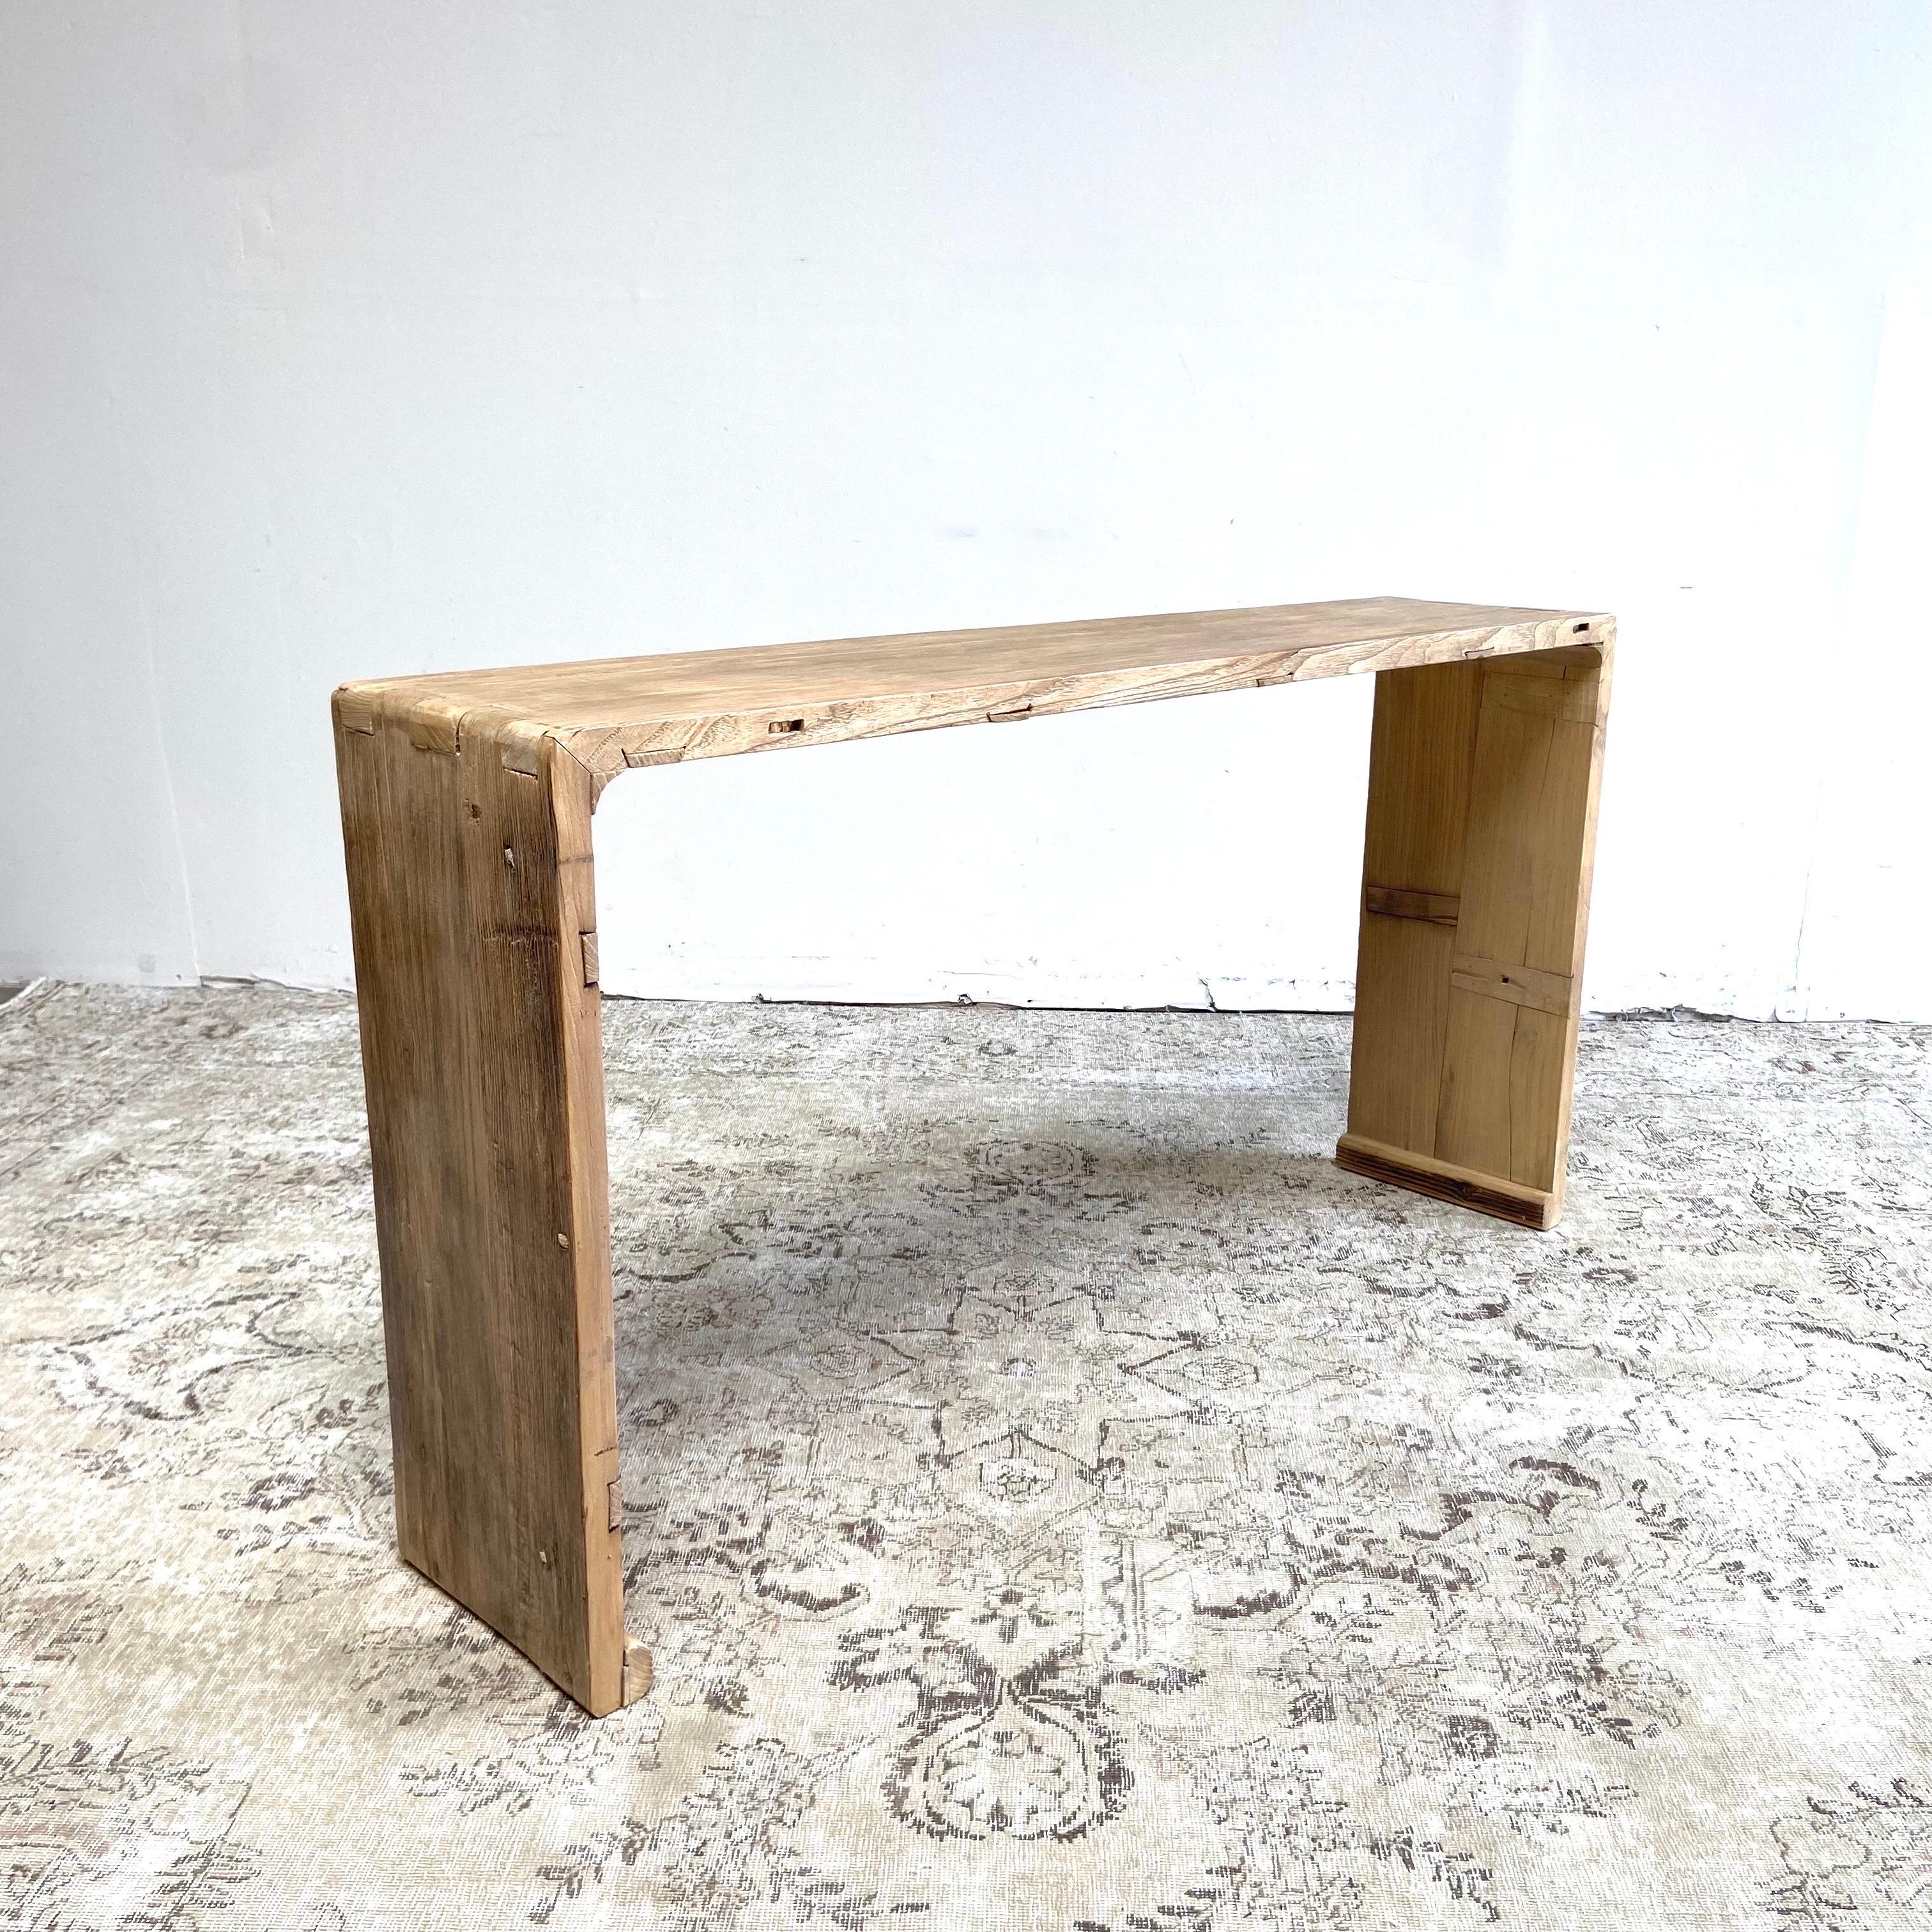 Reclaimed from Vintage timbers, this elm wood console table features original notches from the door hinges on the inside of the legs.
Made from Vintage reclaimed elm wood. Beautiful antique patina, with weathering and age, these are solid and